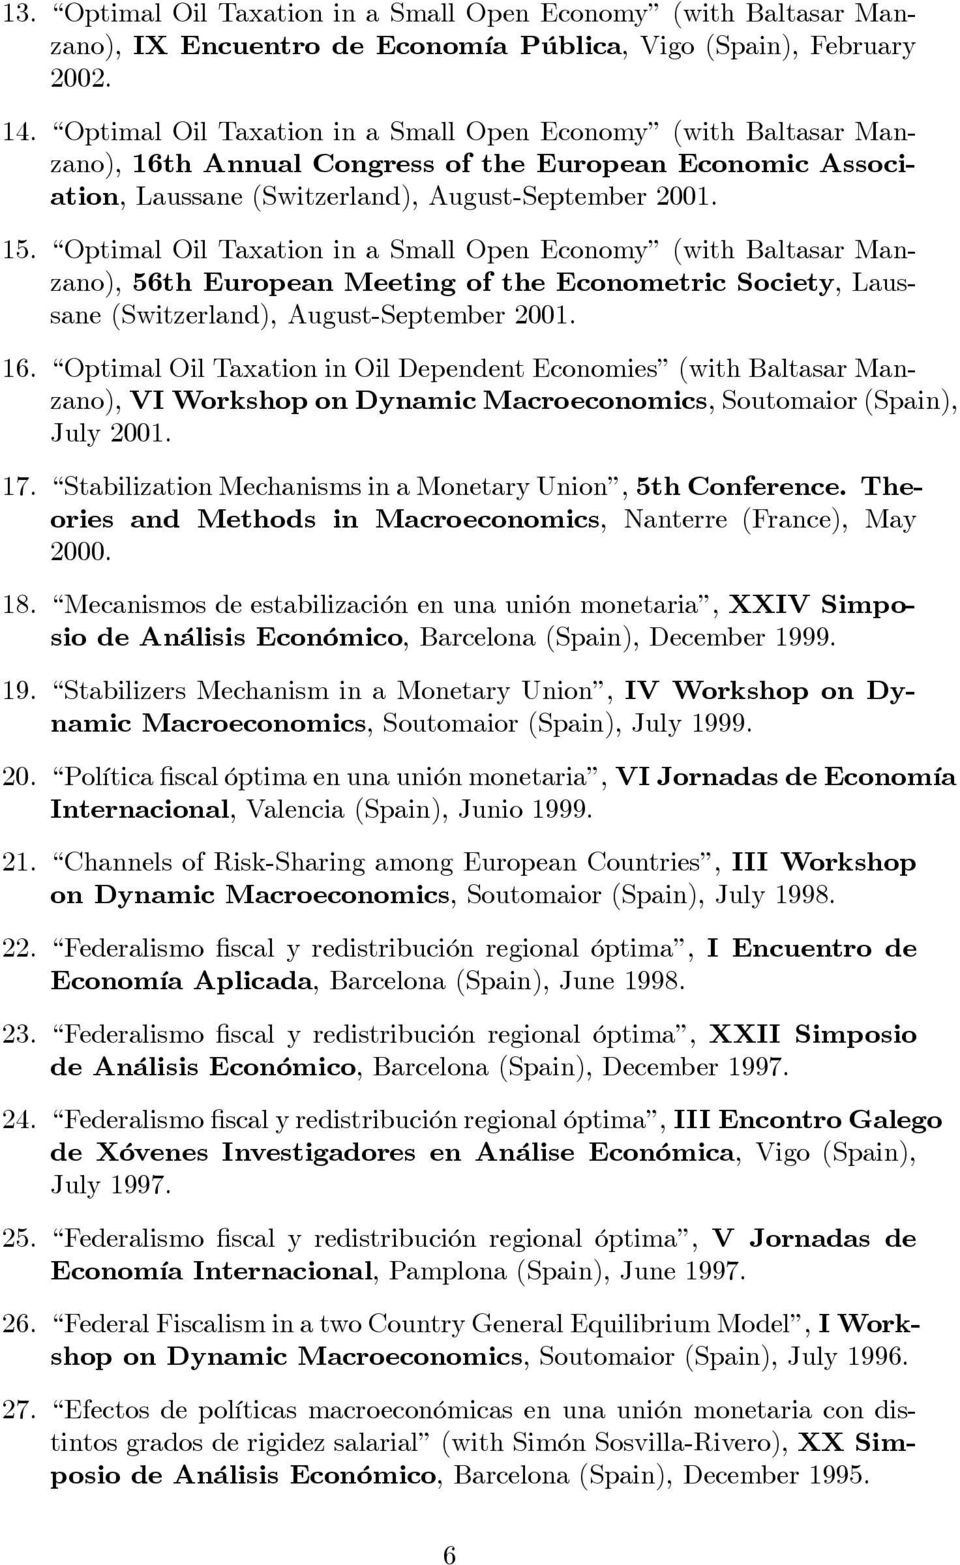 Optimal Oil Taxation in a Small Open Economy (with Baltasar Manzano), 56th European Meeting of the Econometric Society, Laussane (Switzerland), August-September 2001. 16.